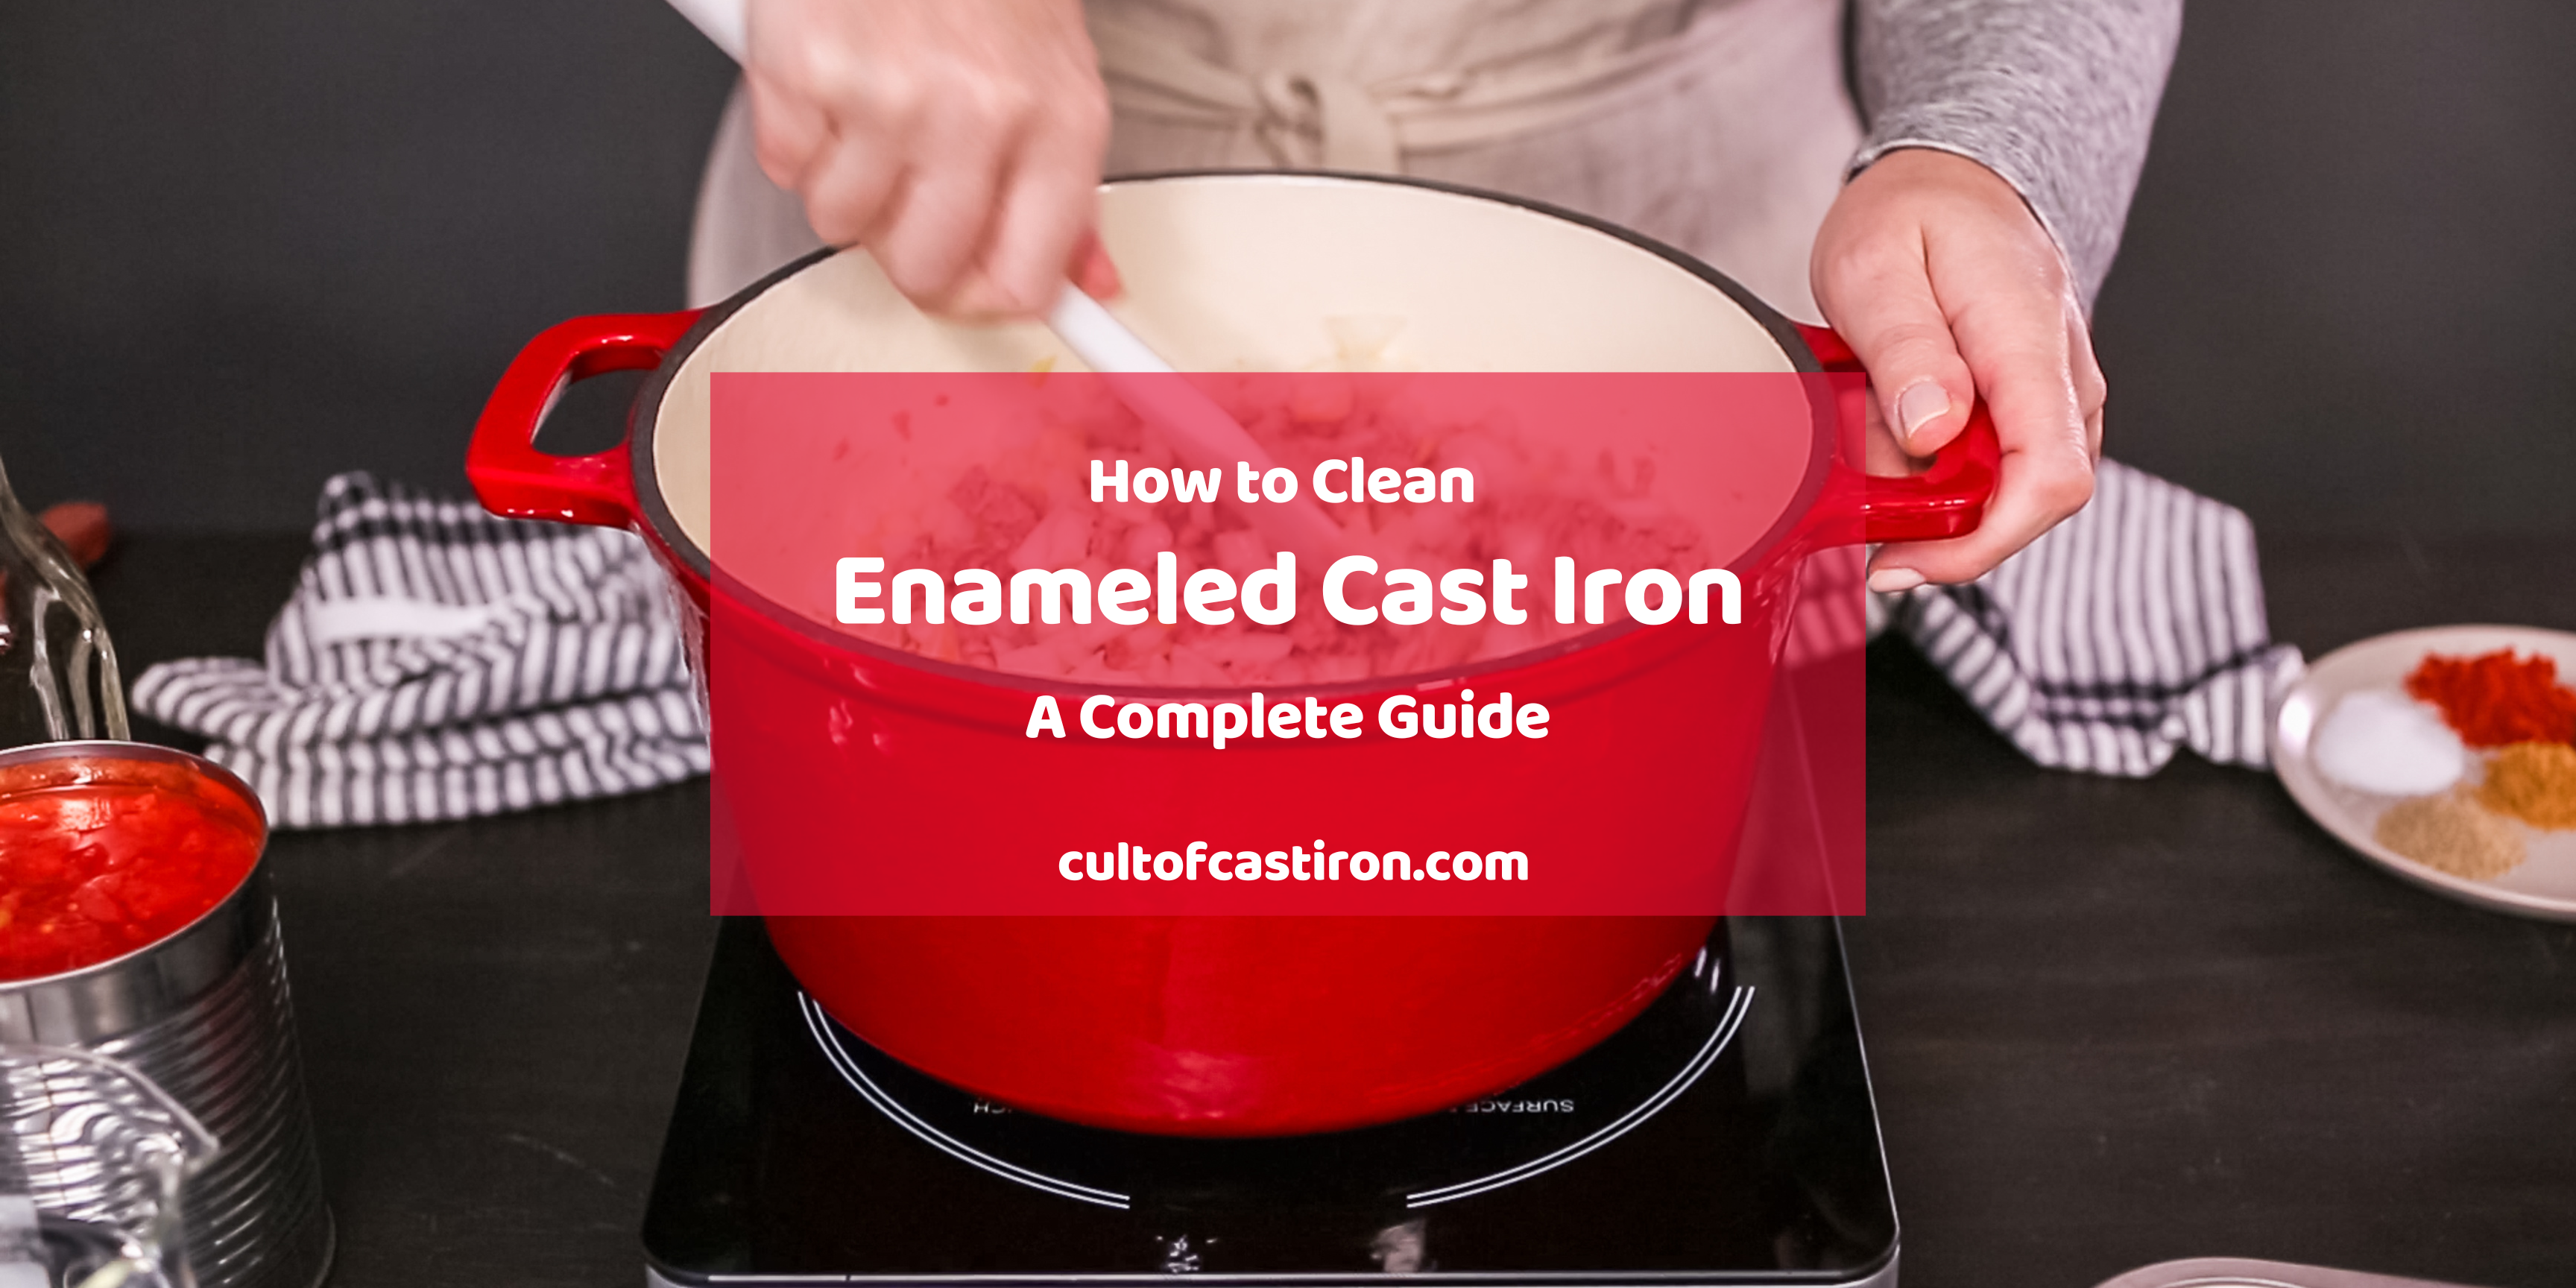 https://cultofcastiron.com/wp-content/uploads/2023/06/how-to-clean-enameled-cast-iron-banner.png